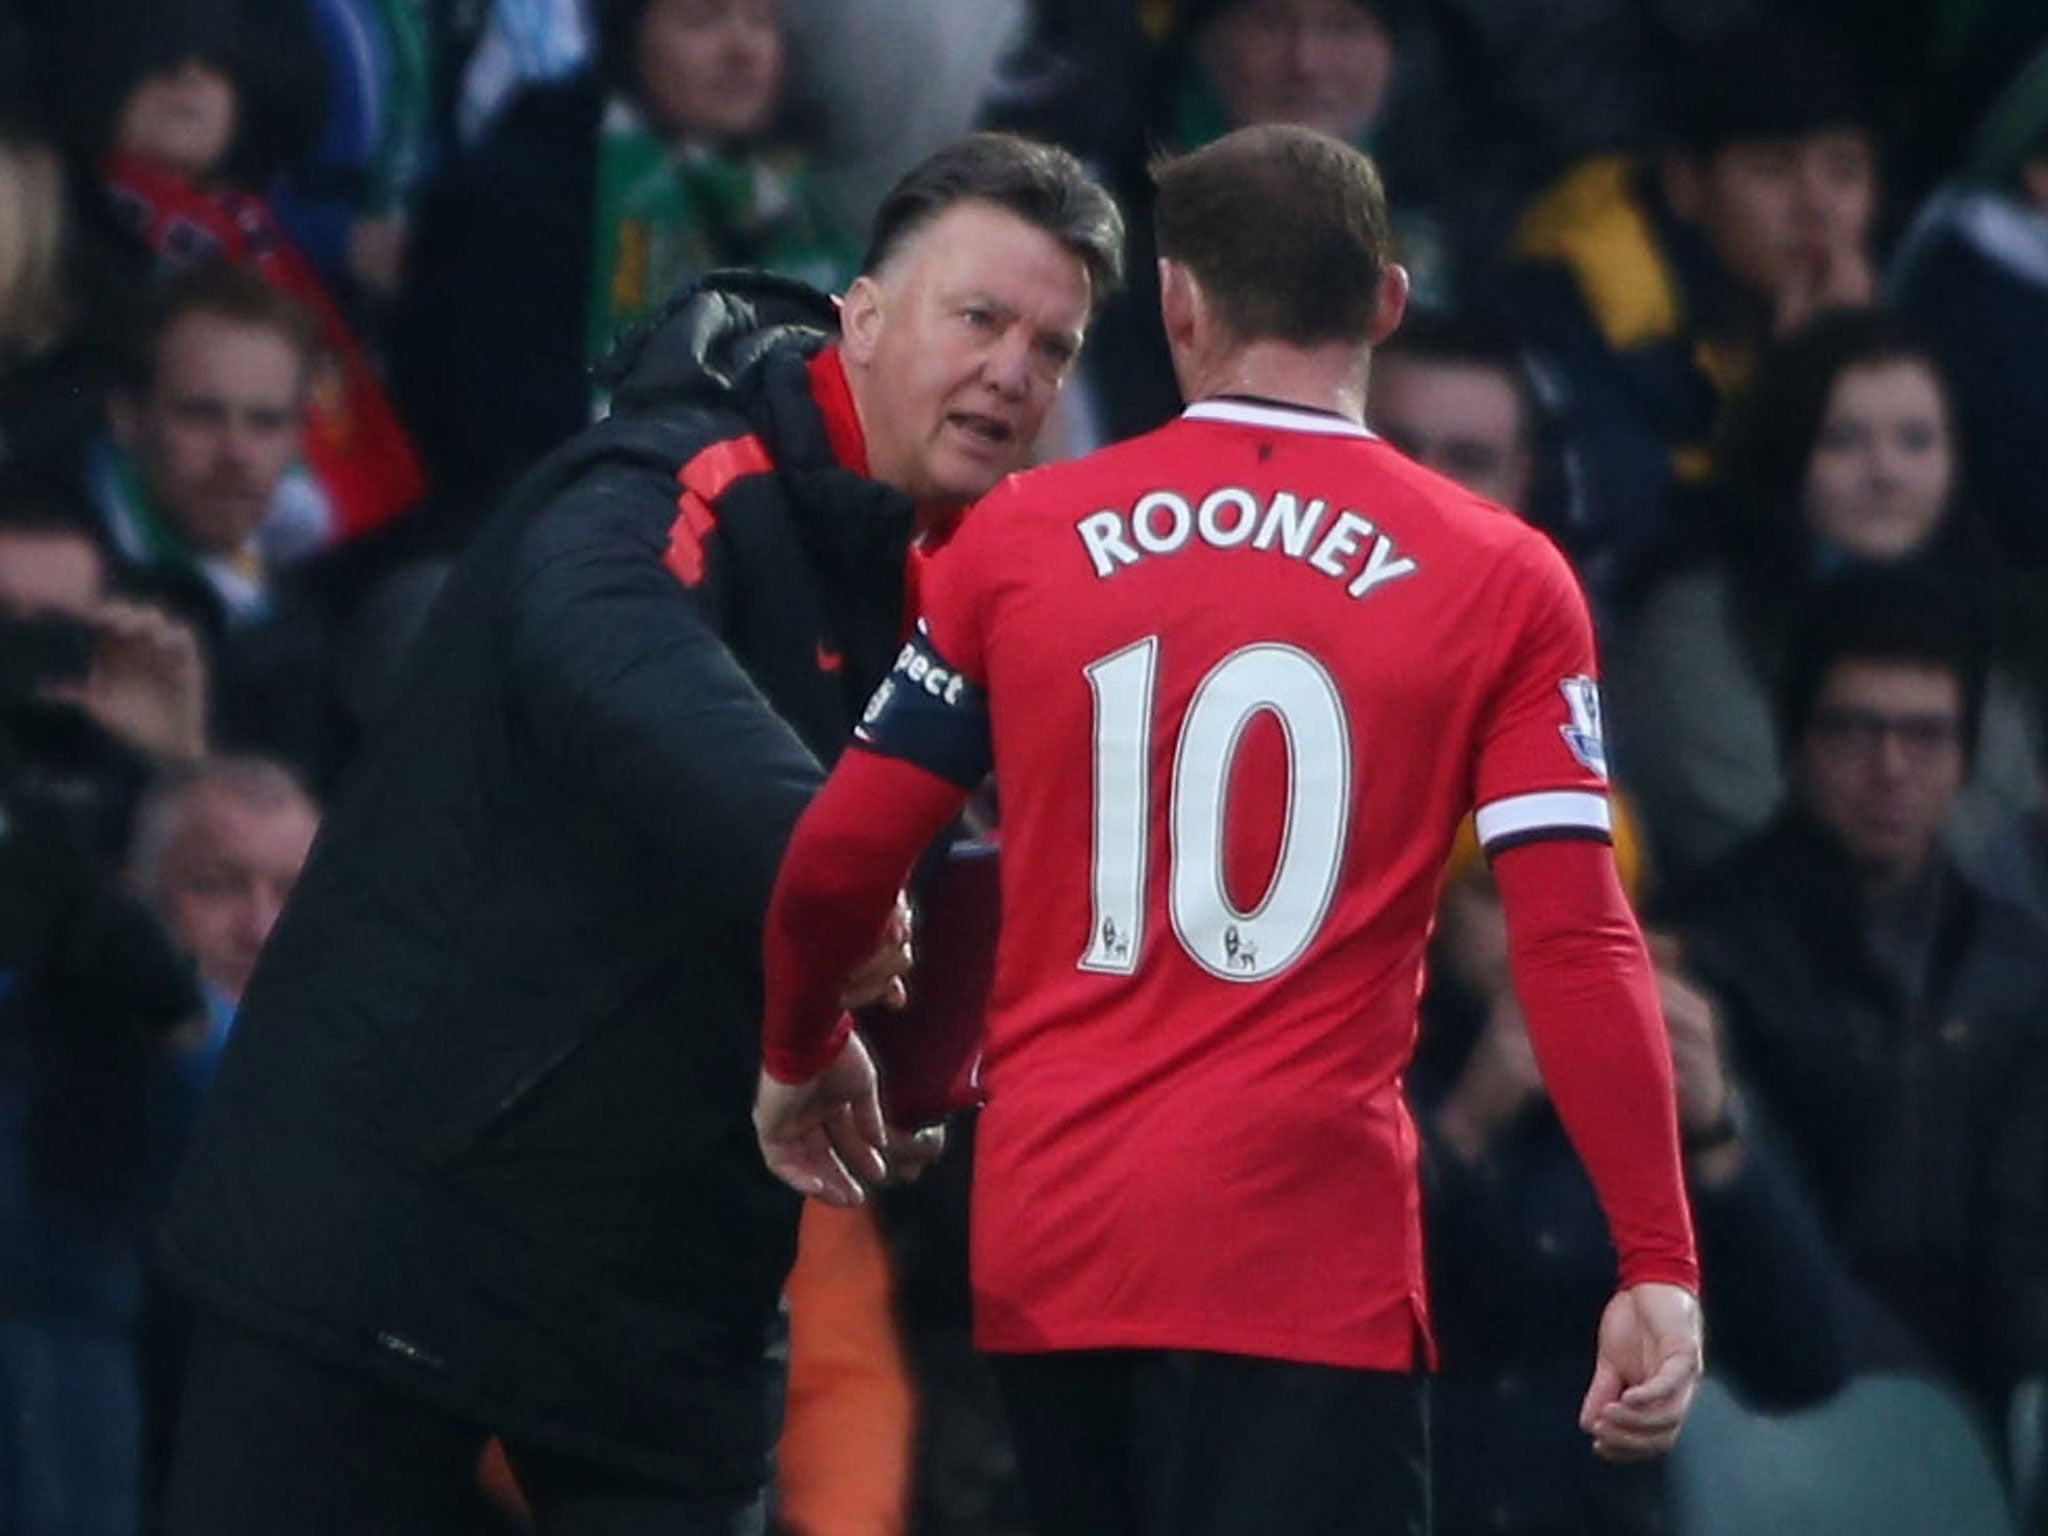 Louis van Gaal talks tactics with Wayne Rooney, who is very happy, says his manager, despite playing out of position